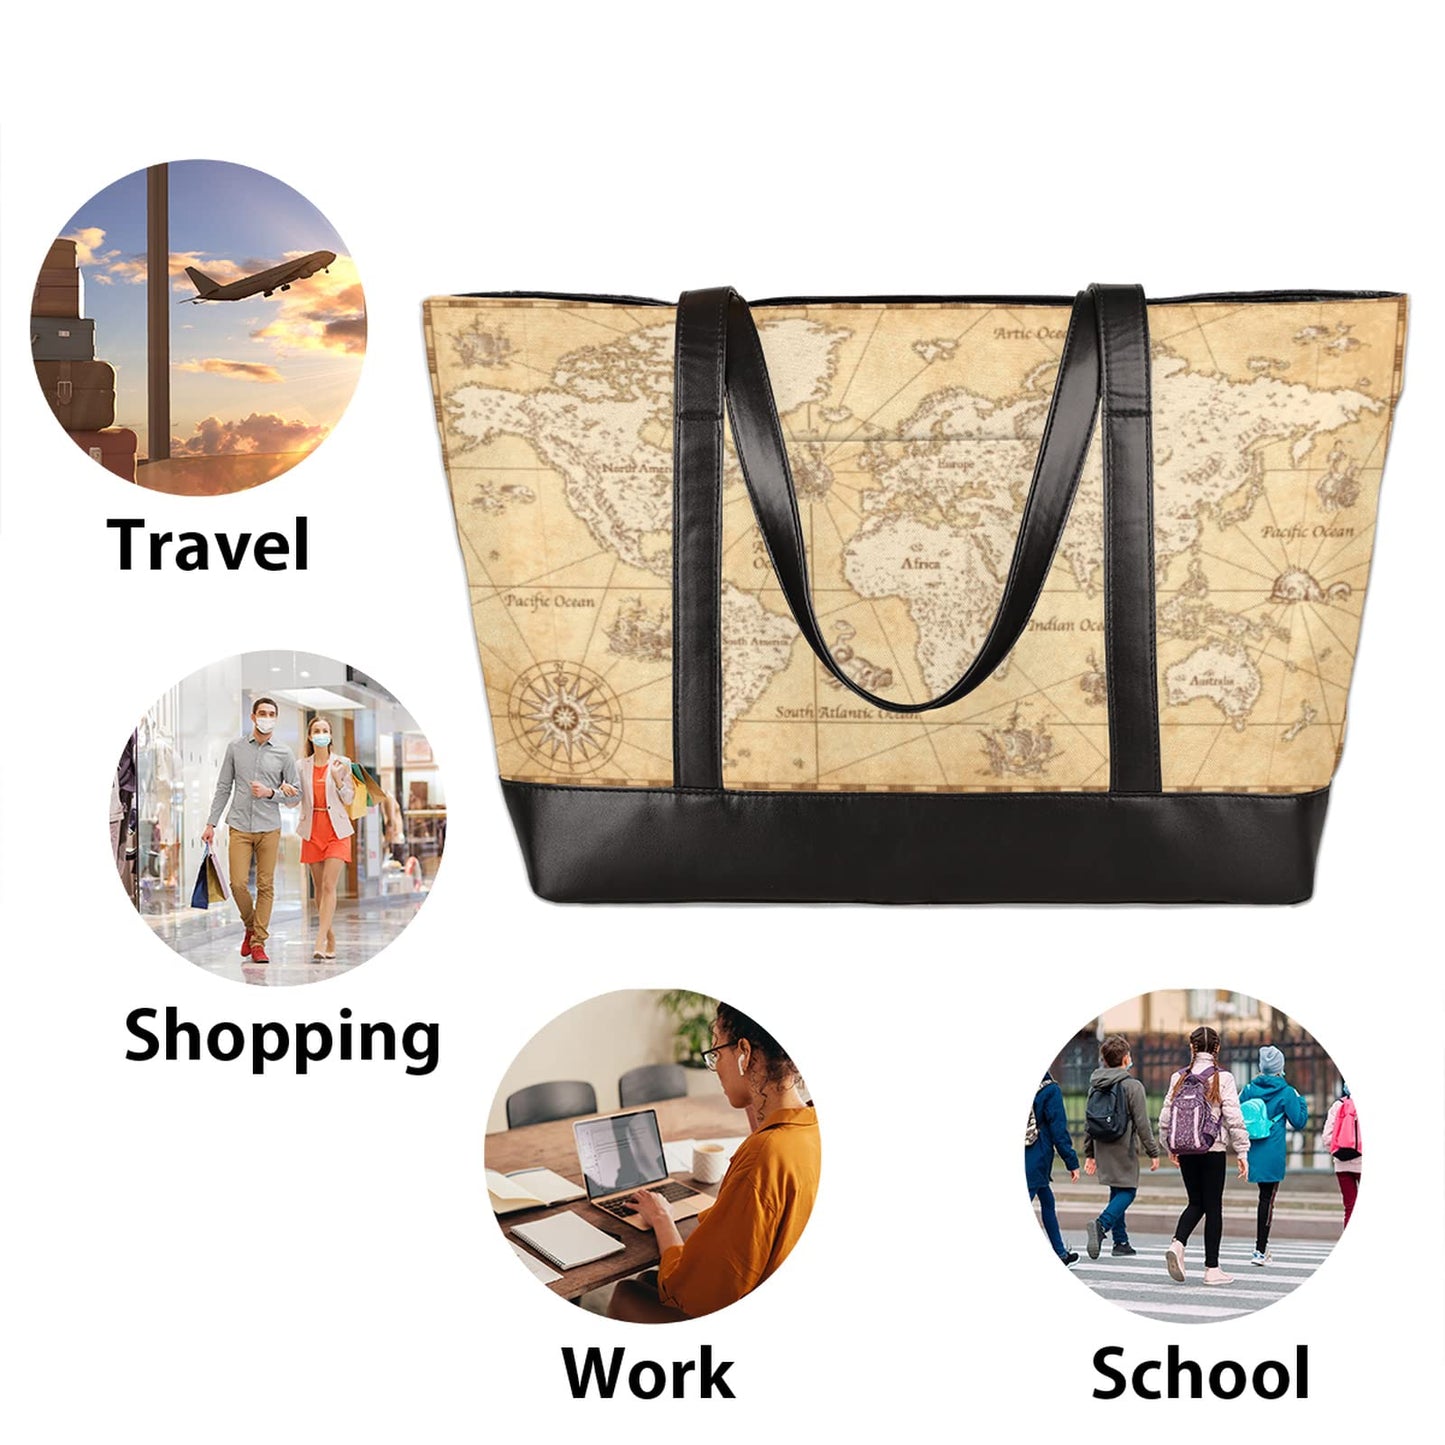 World Map Laptop Tote Bag for Women 15.6 inch